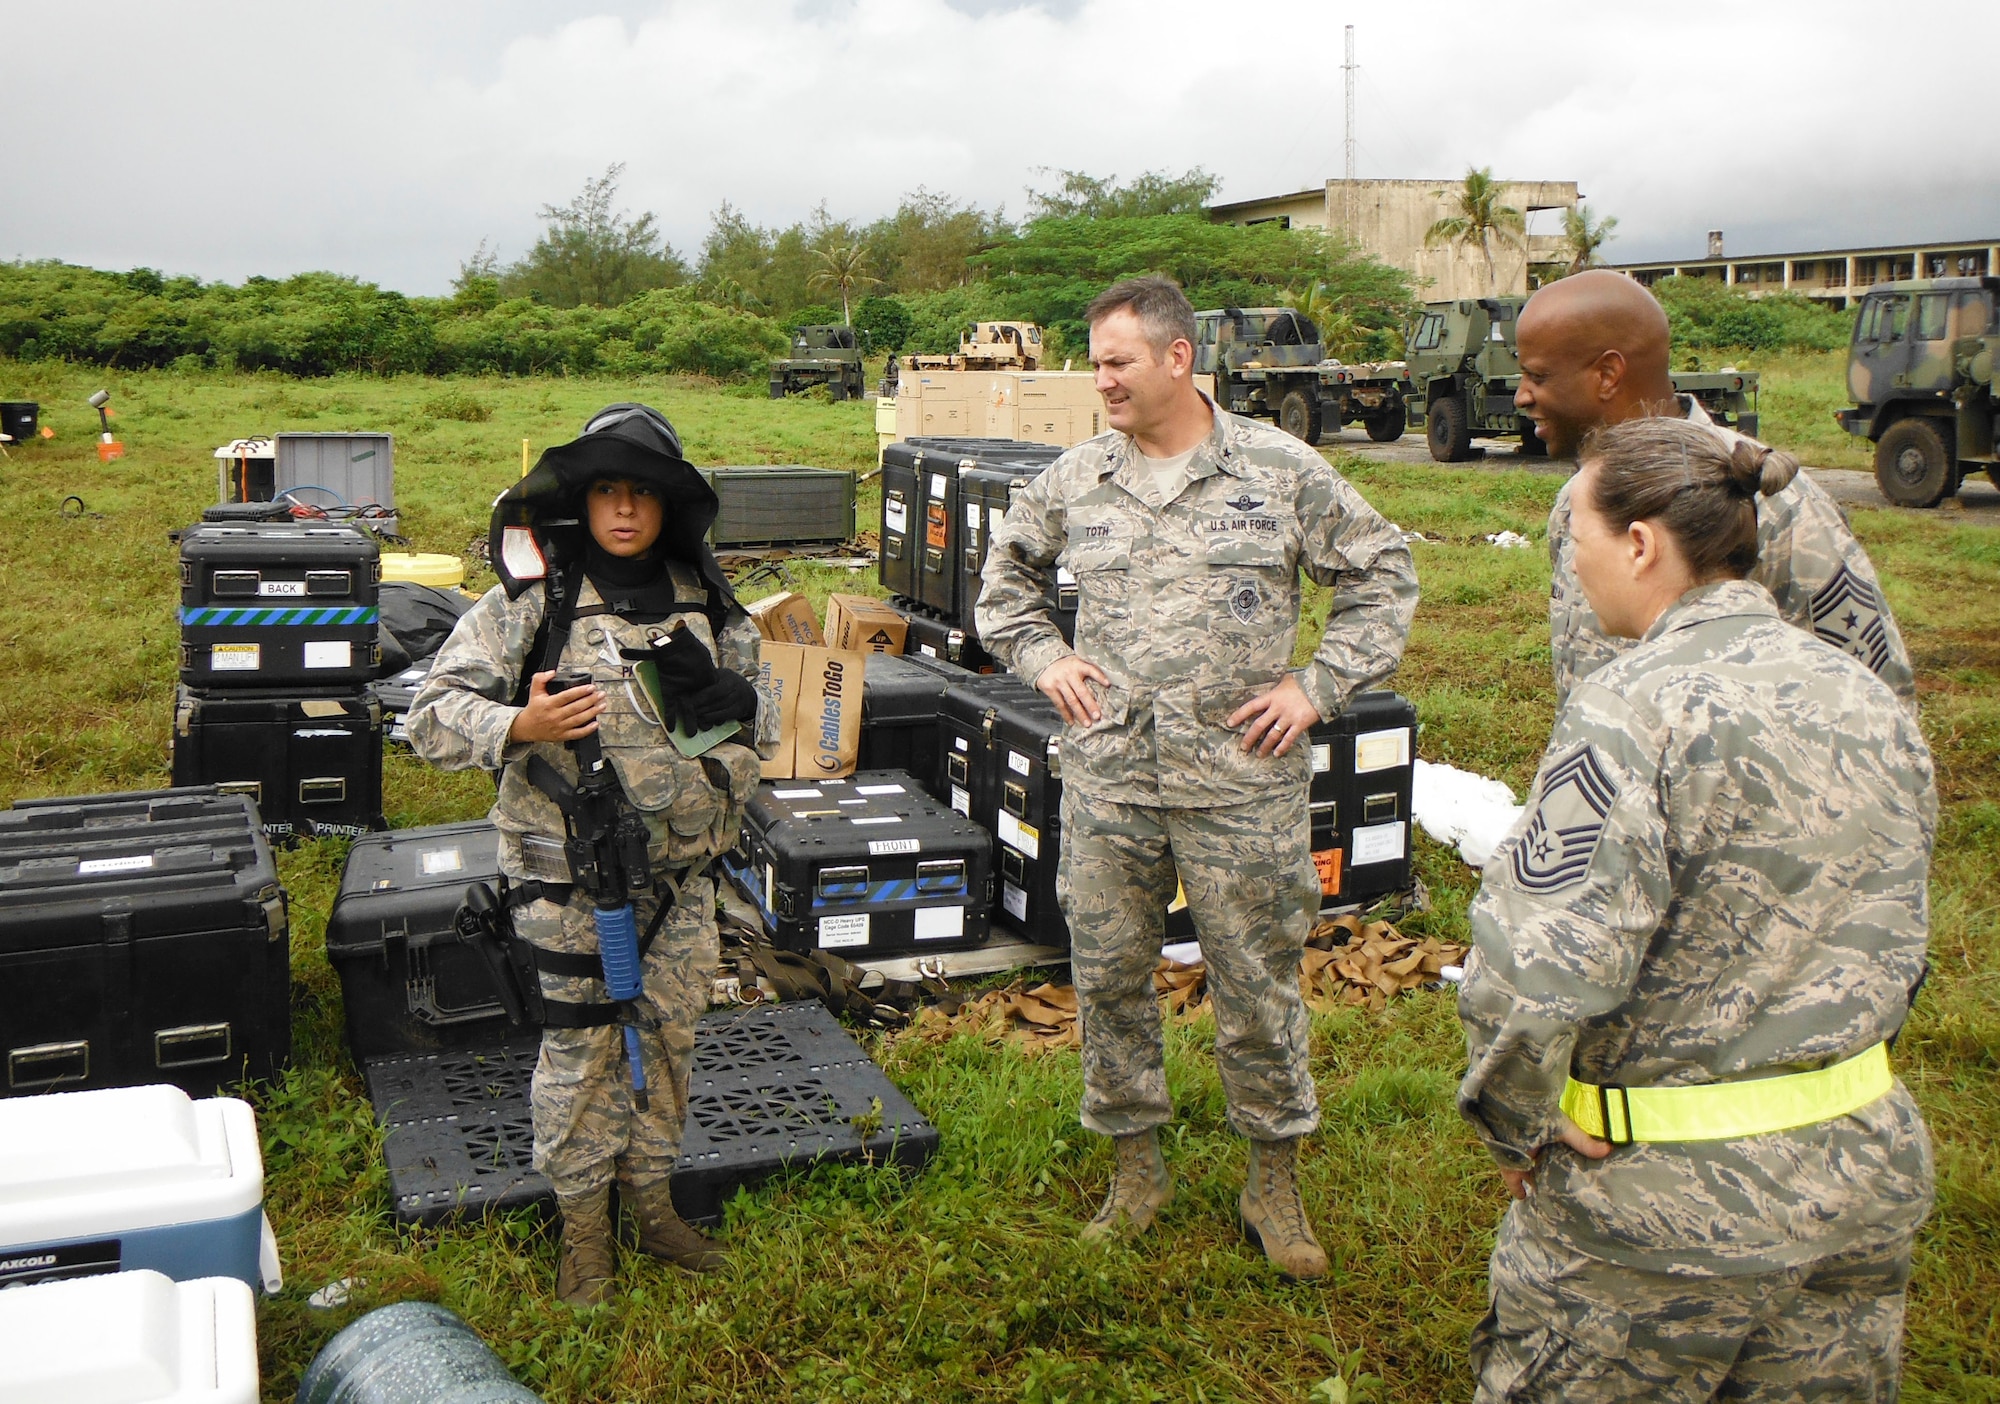 2nd Lt. Denisse Paz, 644th Combat Communications Squadron mission commander, briefs Brig. Gen. Andrew Toth, 36th Wing commander, and Chief Master Sgt. Michael McMillan, 36th Wing command chief, on the site and status of the personnel during an exercise Oct. 28, 2014, at Andersen South, Guam. The exercise allowed Airmen from the 644th CBCS to exercise their abilities to respond to various scenarios during contingency operations. (U.S. Air Force courtesy photo/Released)